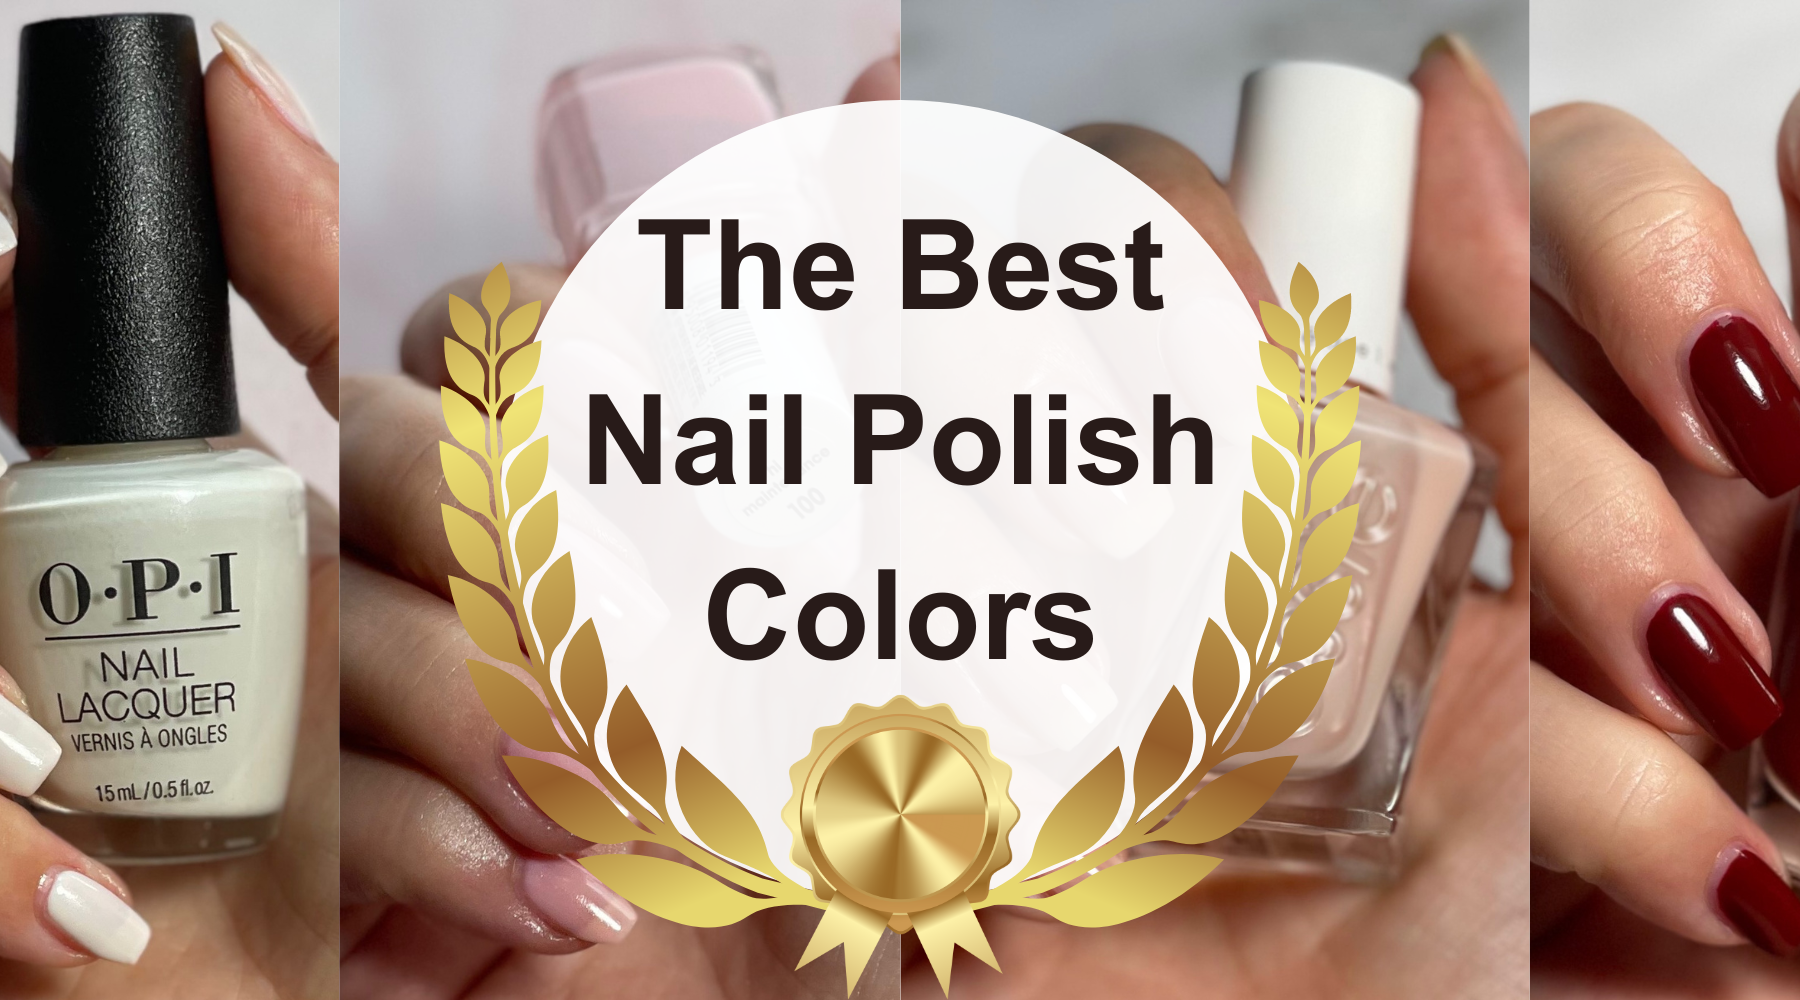 25 March Nail Colors You Need to Try Right Now | Who What Wear